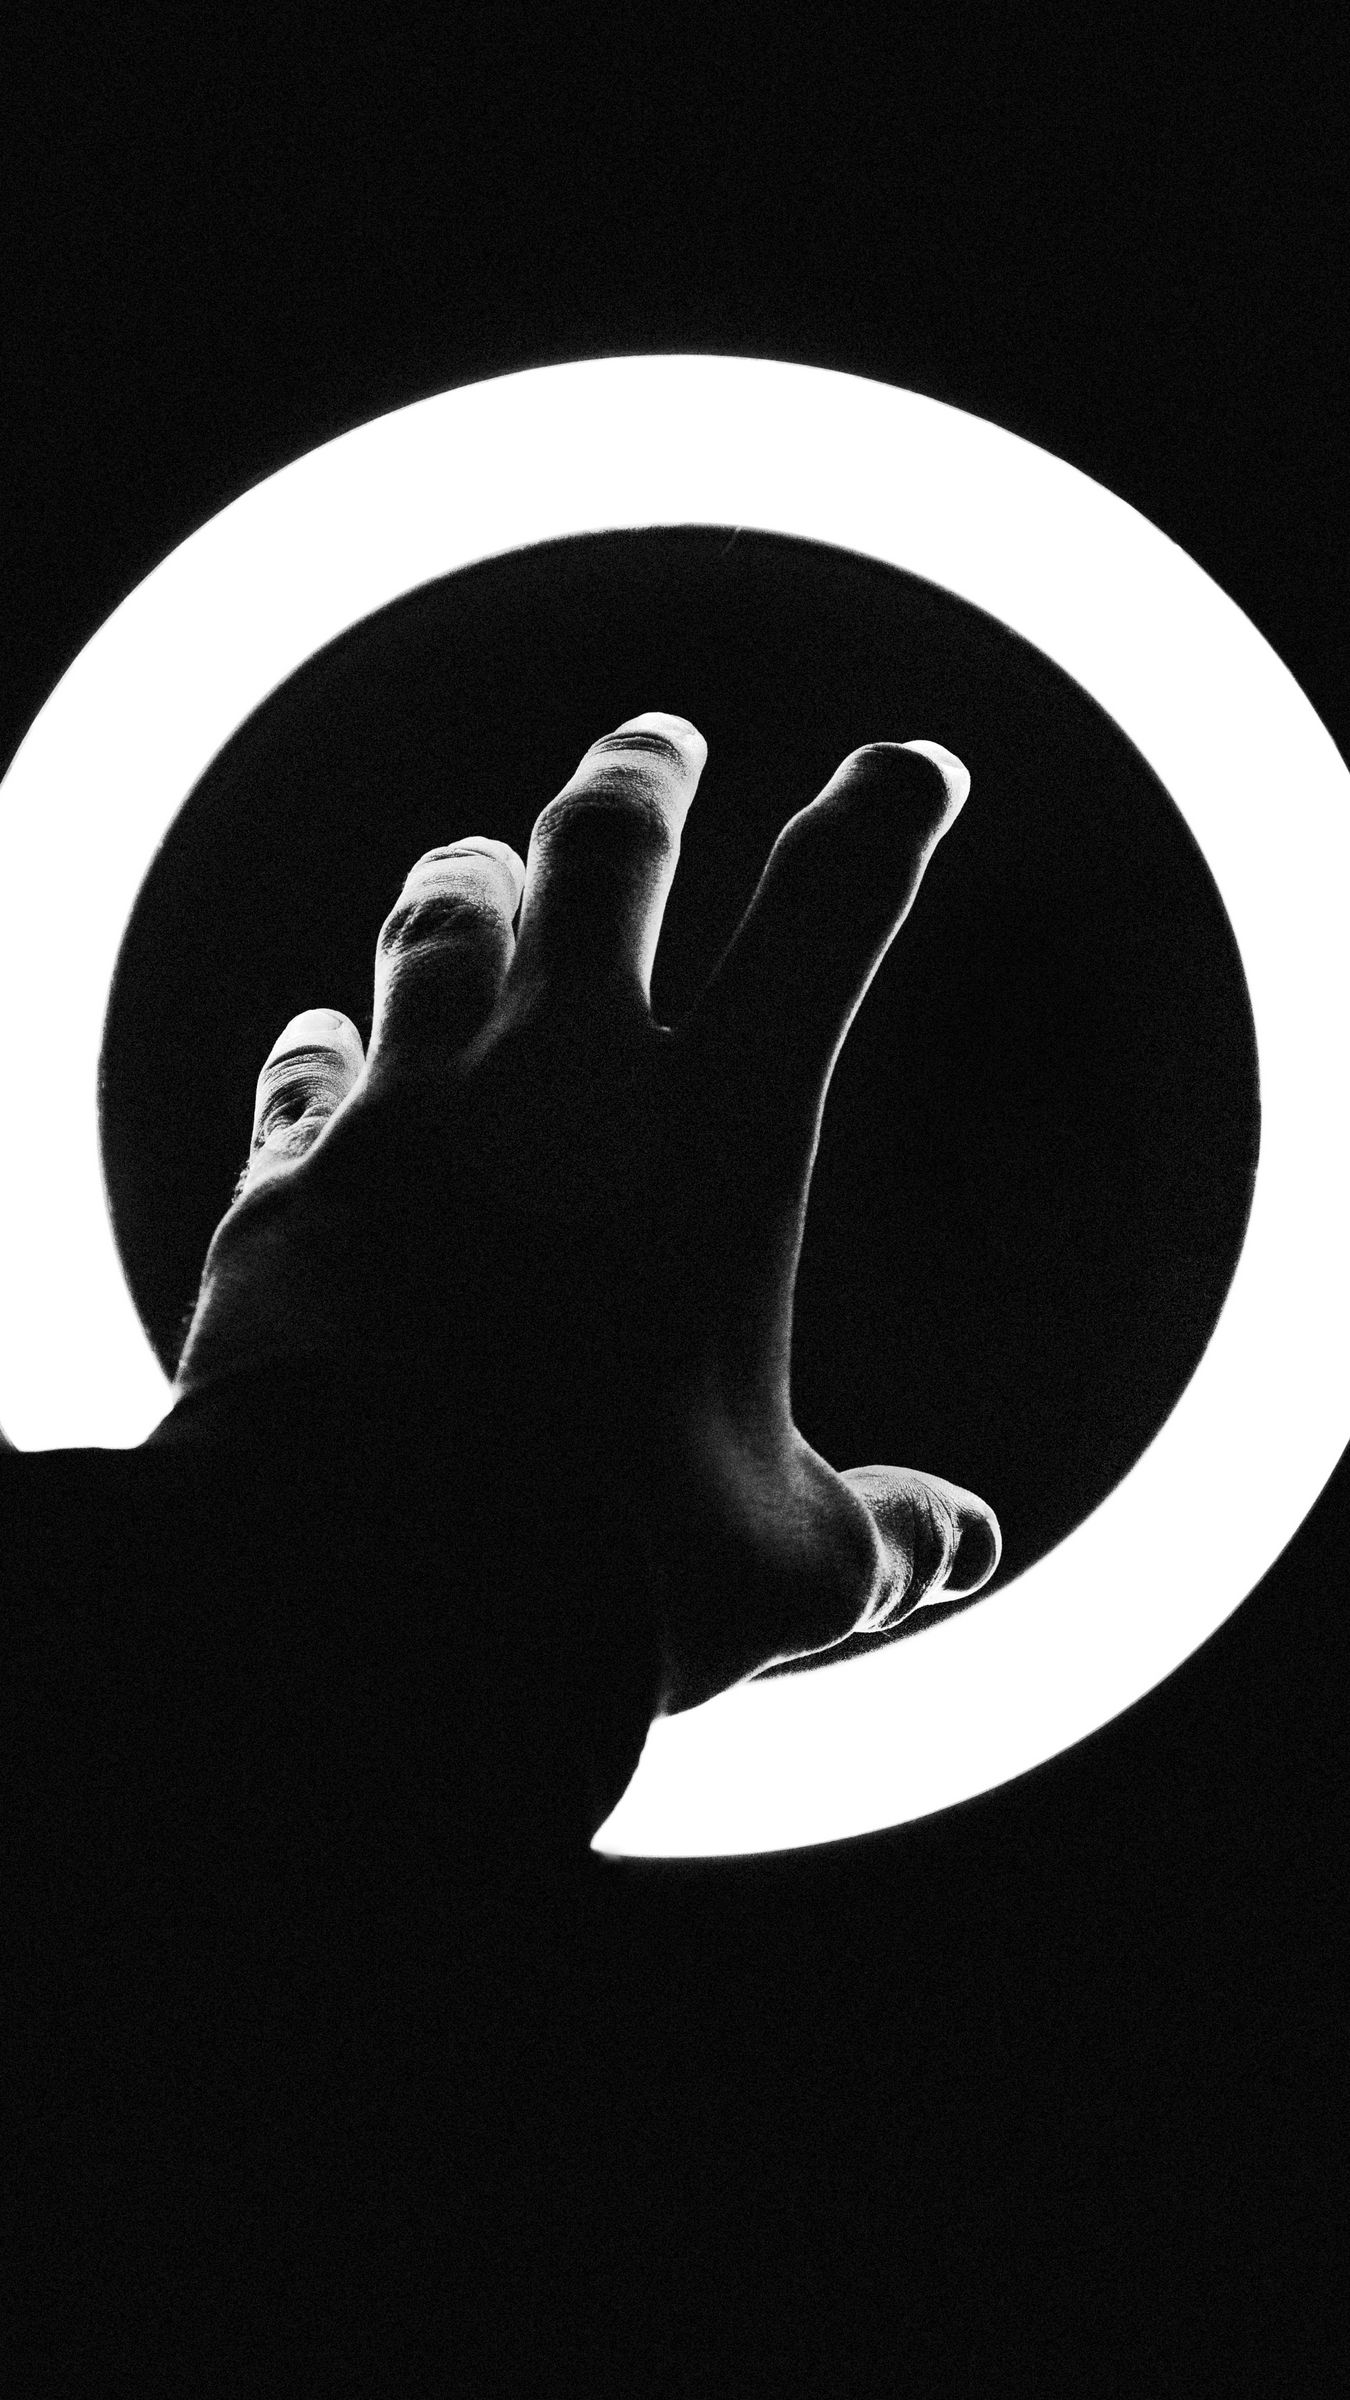 Download wallpaper 1350x2400 hand, ring, light, bw iphone 8+/7+/6s+/6+ for  parallax hd background